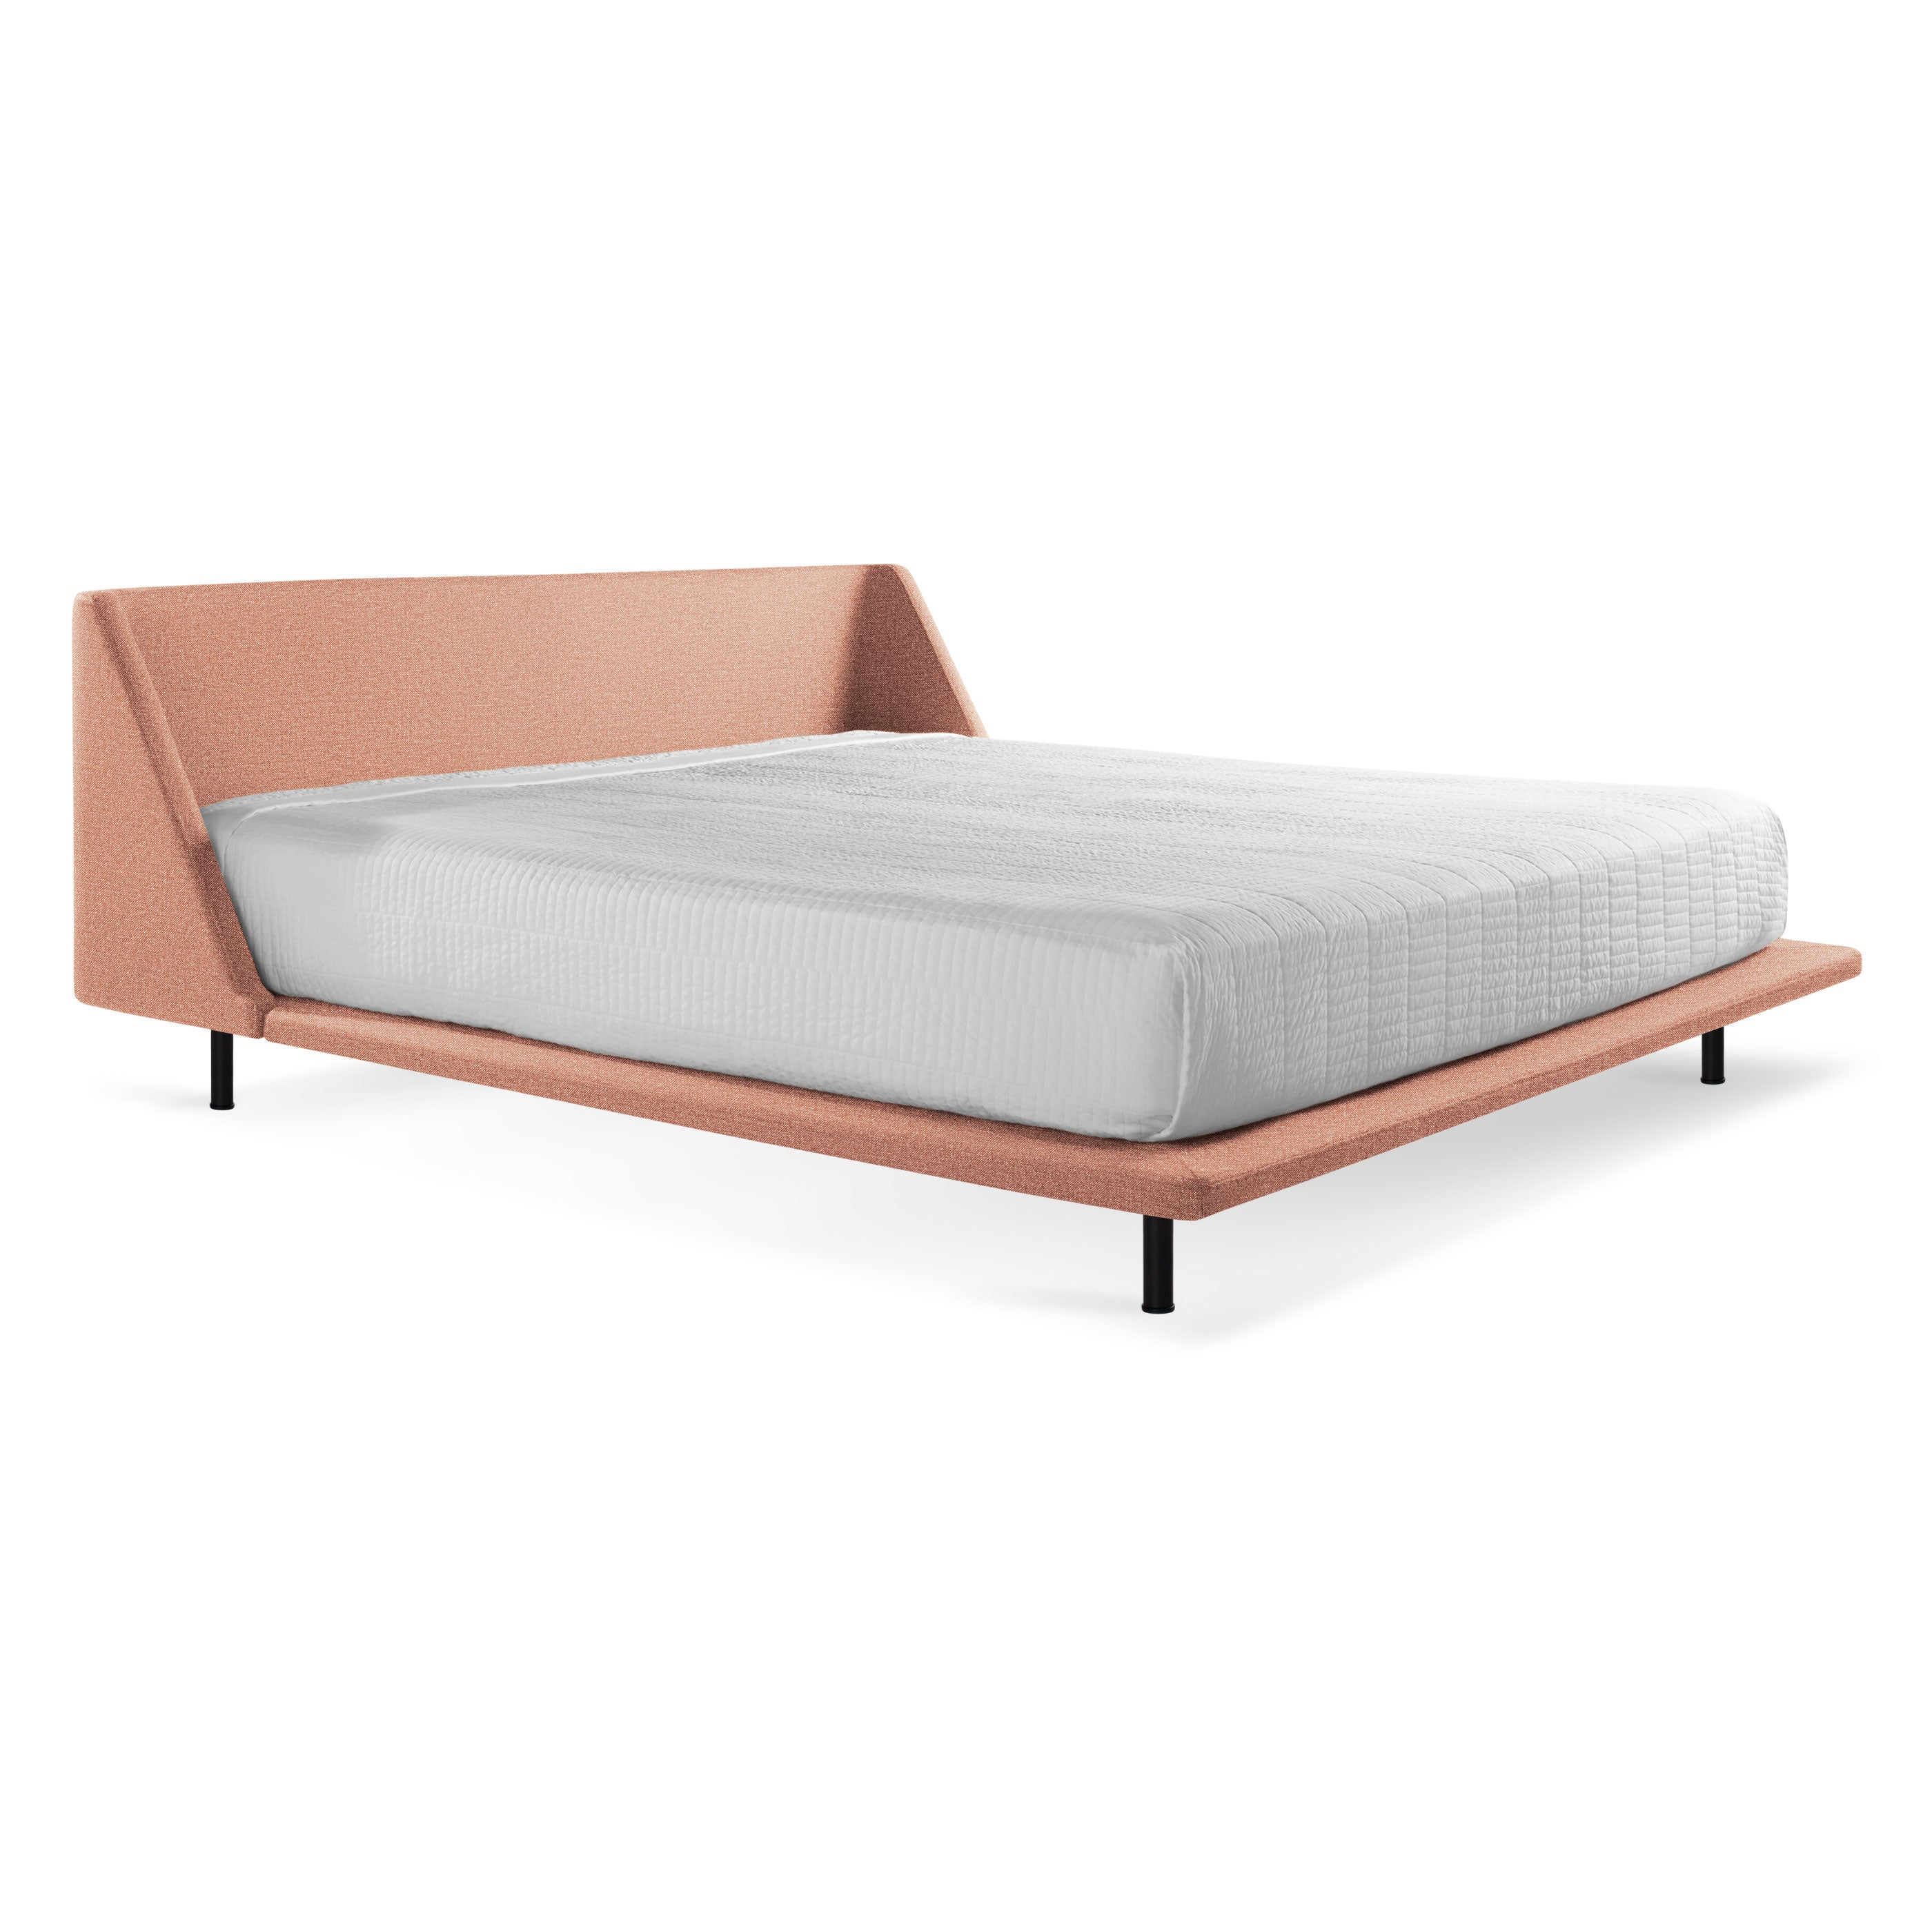 Blu Dot Nook Bed Upholstered Twin Full Queen King